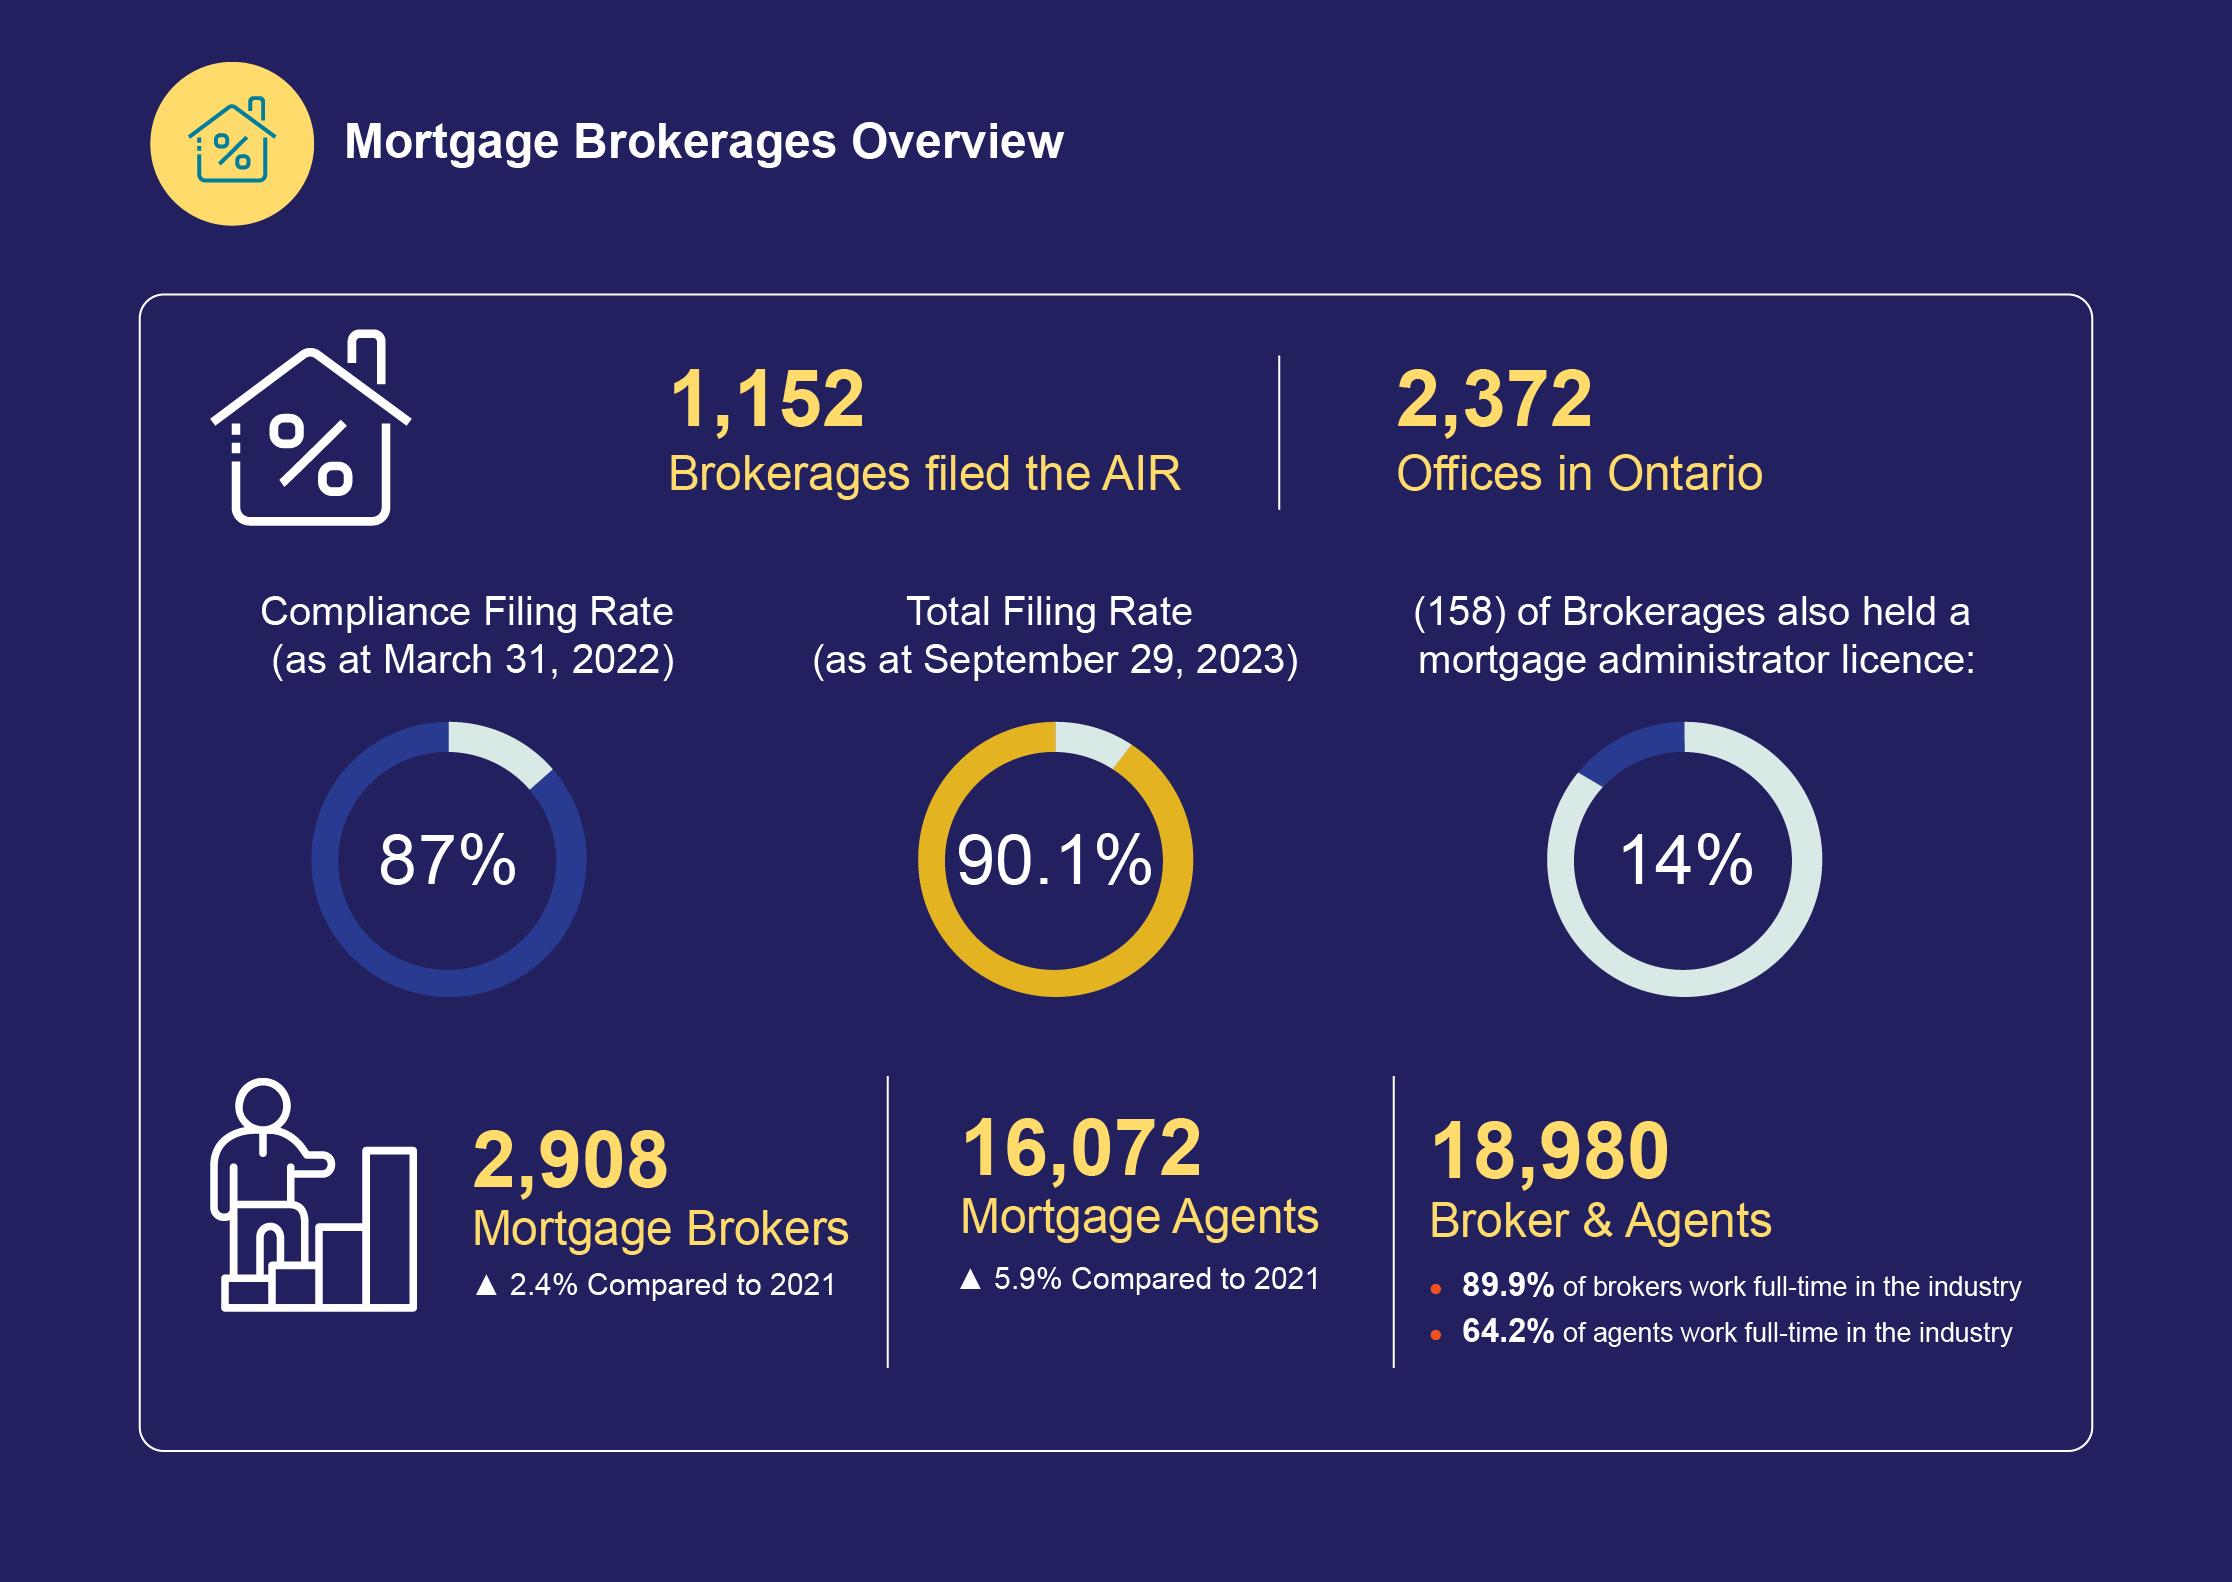 Mortgage brokerages overview